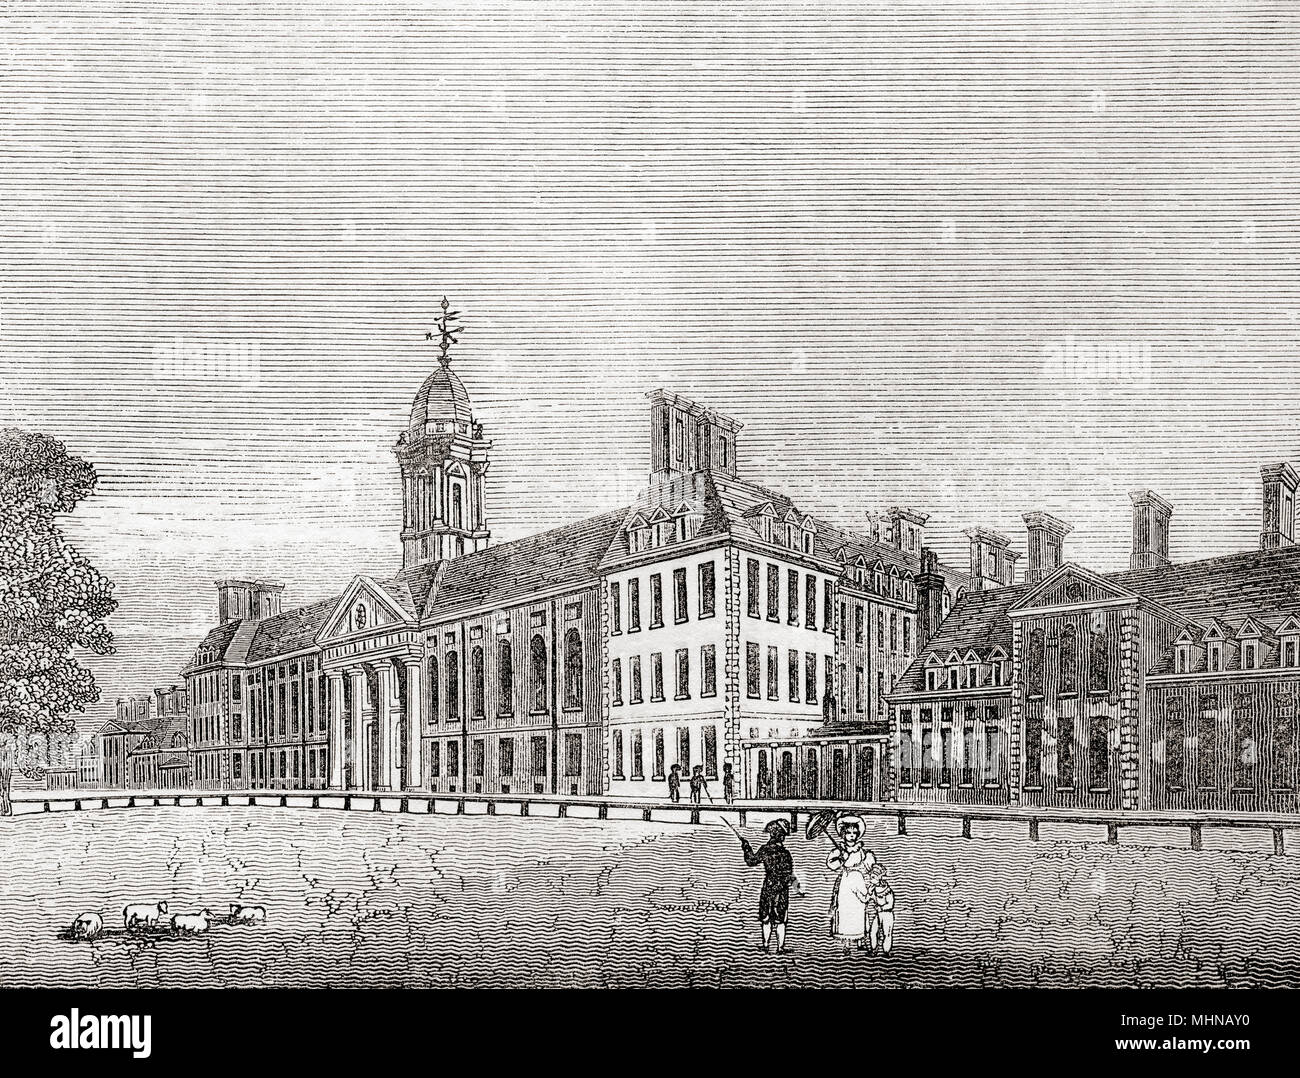 The north front of The Royal Hospital Chelsea, Chelsea, London, England, a retirement and nursing home for veterans of the British Army.  From Old England: A Pictorial Museum, published 1847. Stock Photo